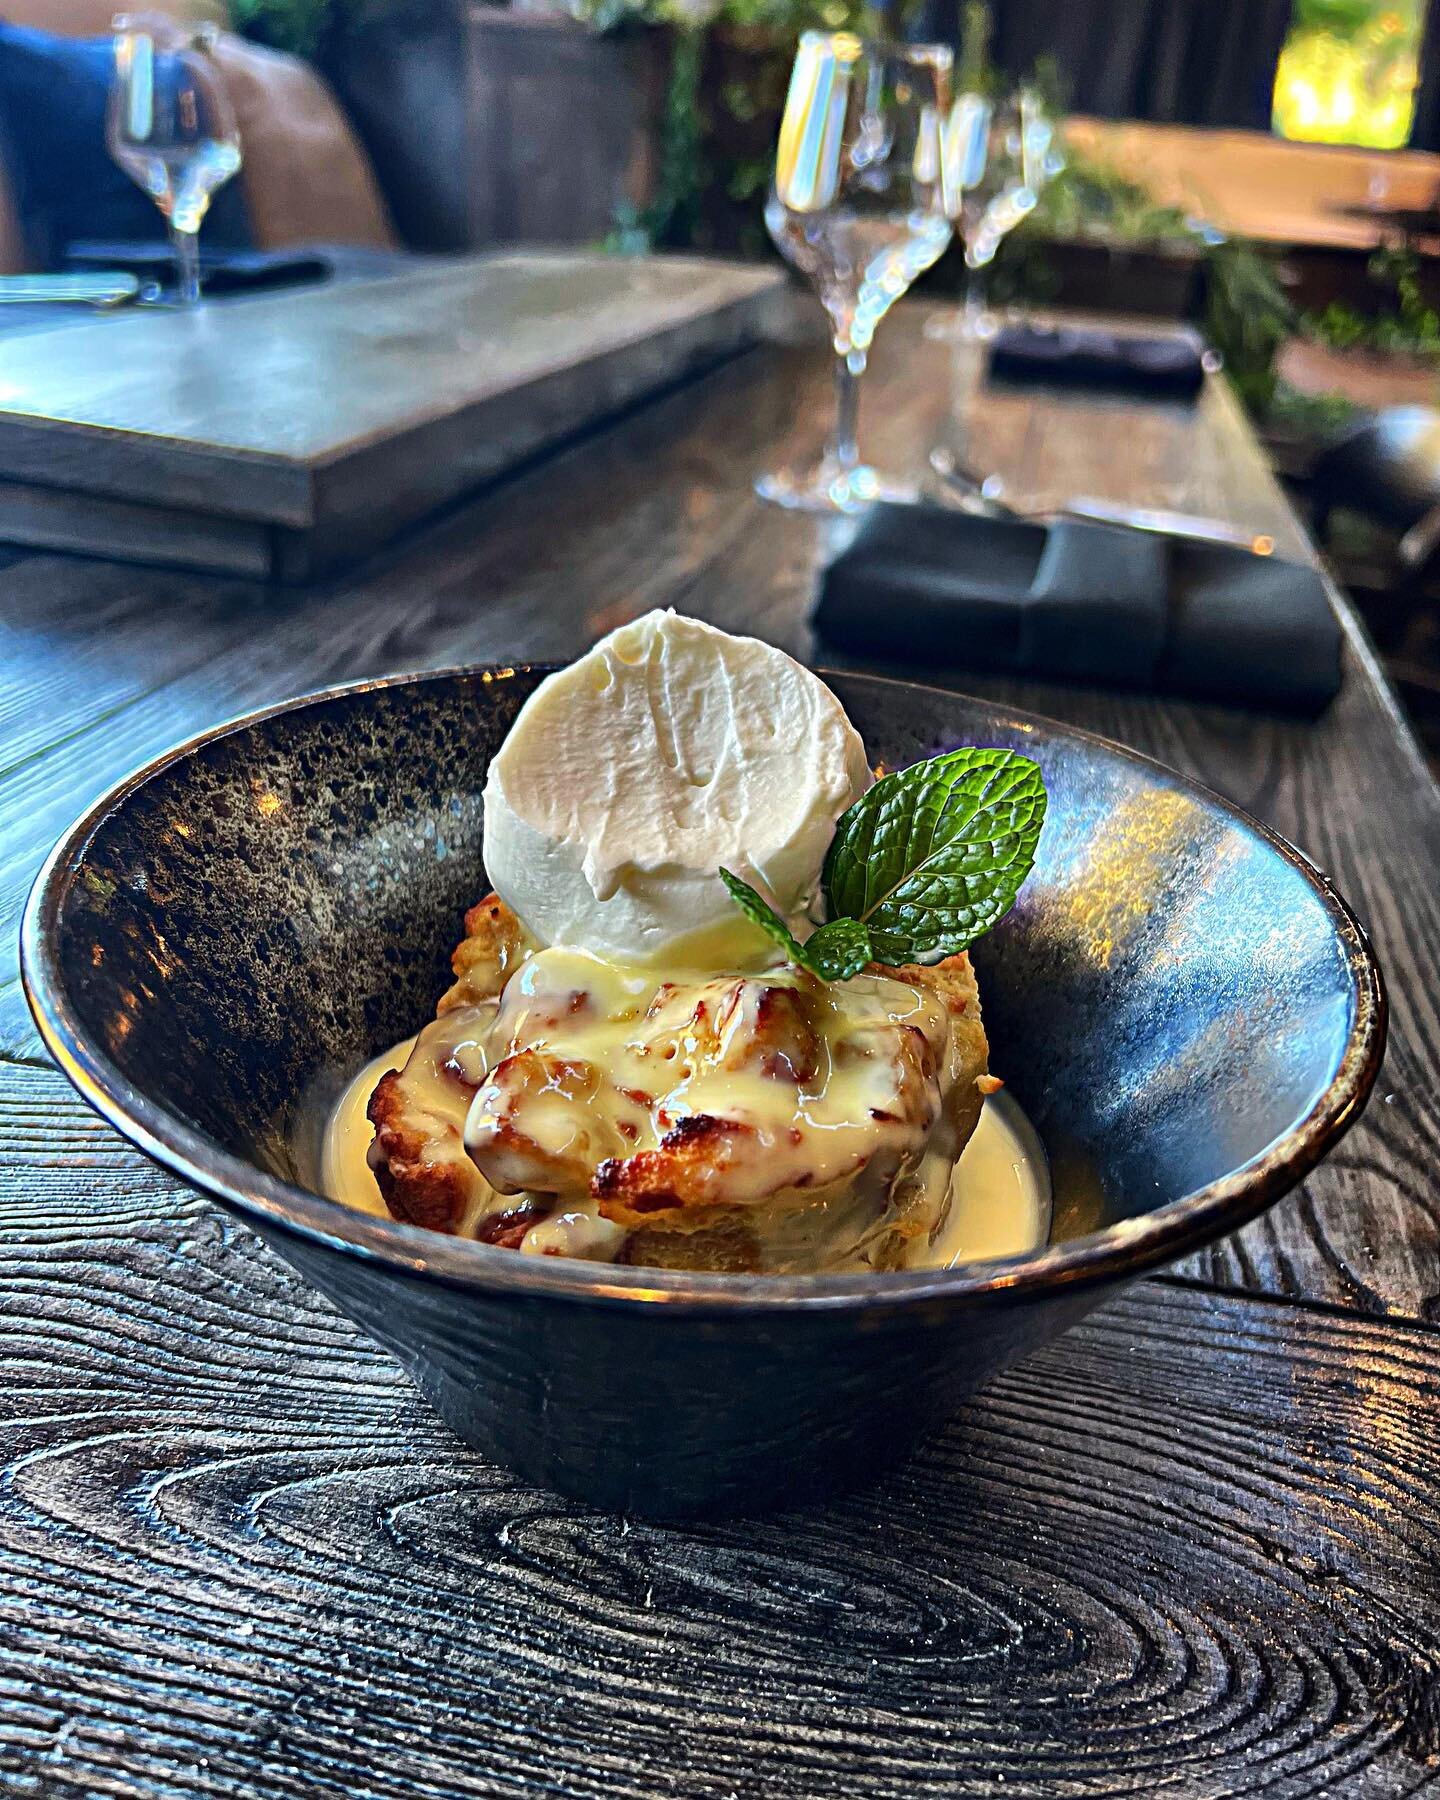 Have you tried our apple bread pudding?